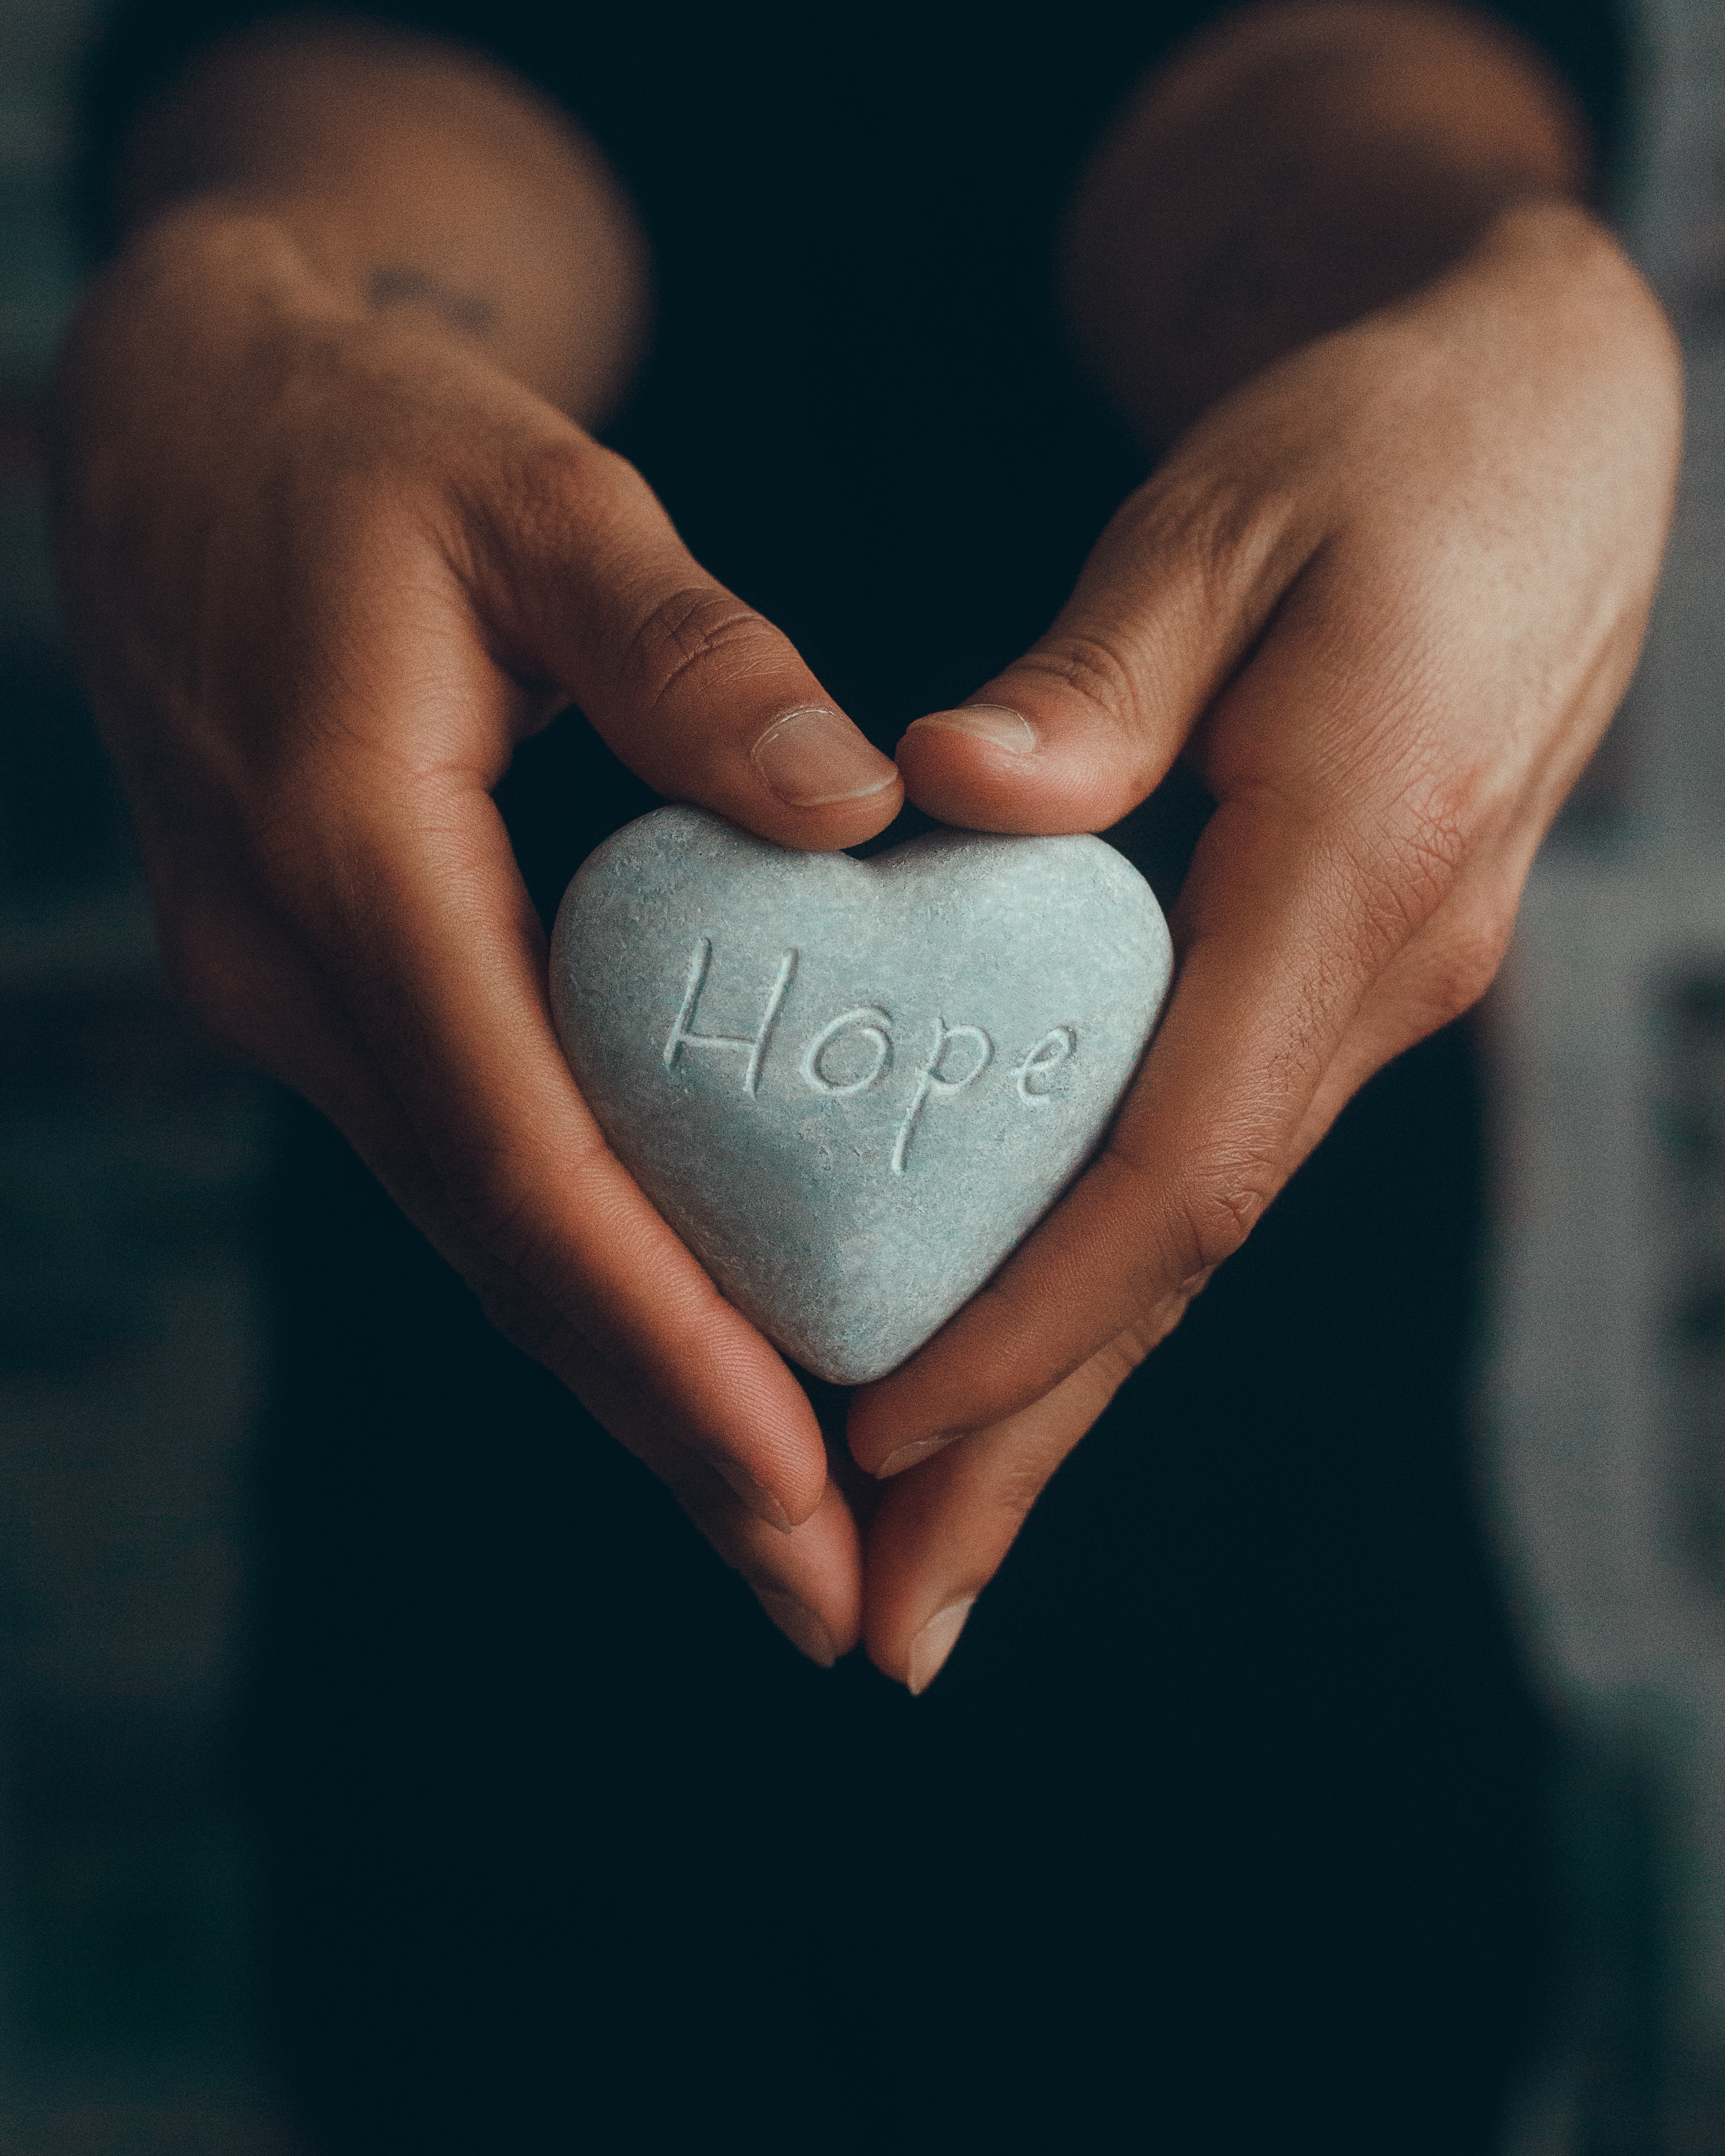 android hope, inscription, heart, words, rock, hands, stone, word